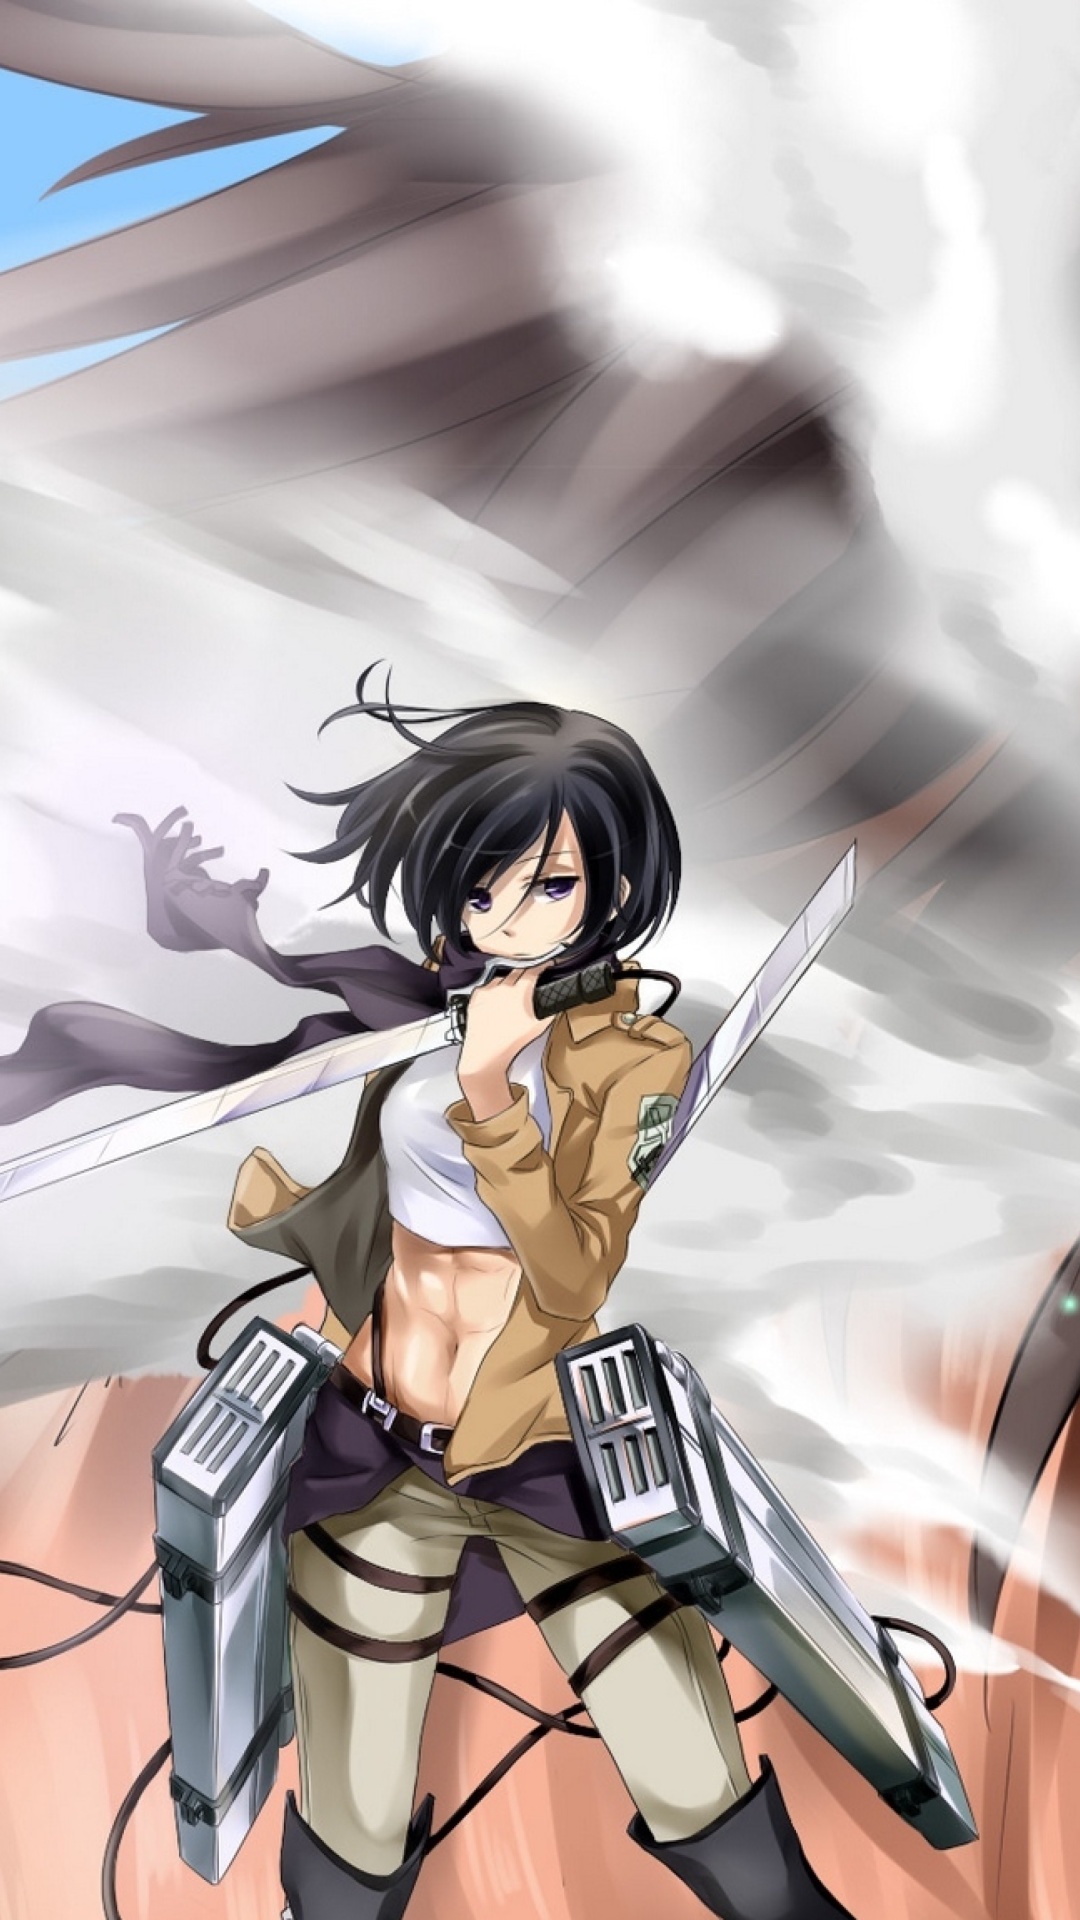 Attack on Titan with Eren and Mikasa wallpaper 1080x1920